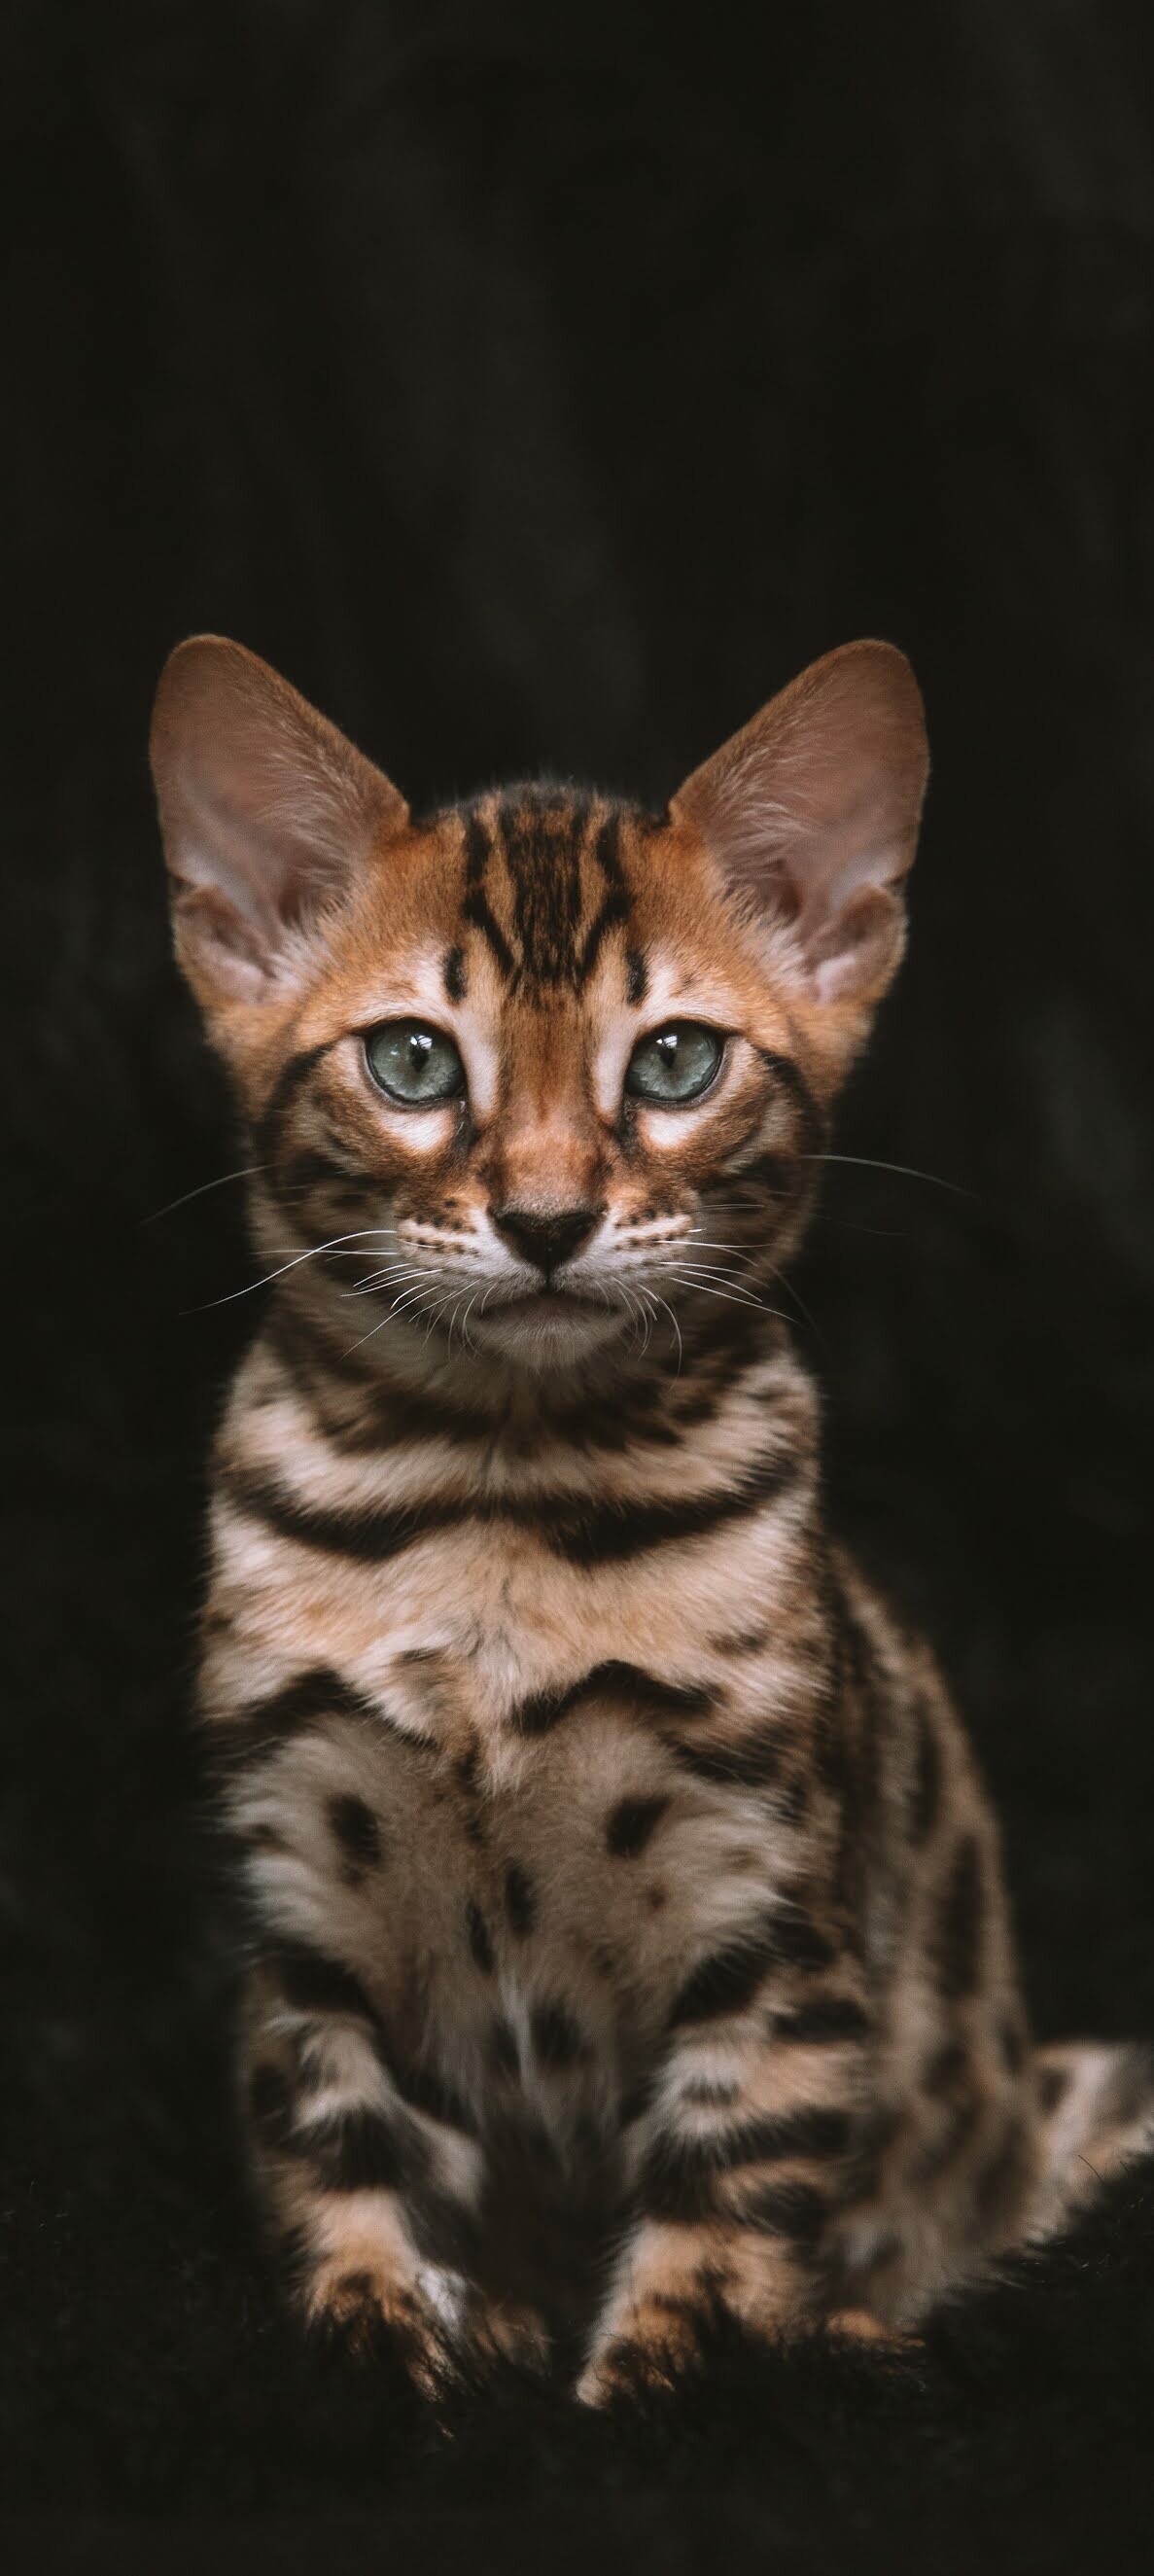 Bengal Cat: Bengal cats are an intelligent and active breed prized for their boldly patterned coats. 1190x2650 HD Wallpaper.